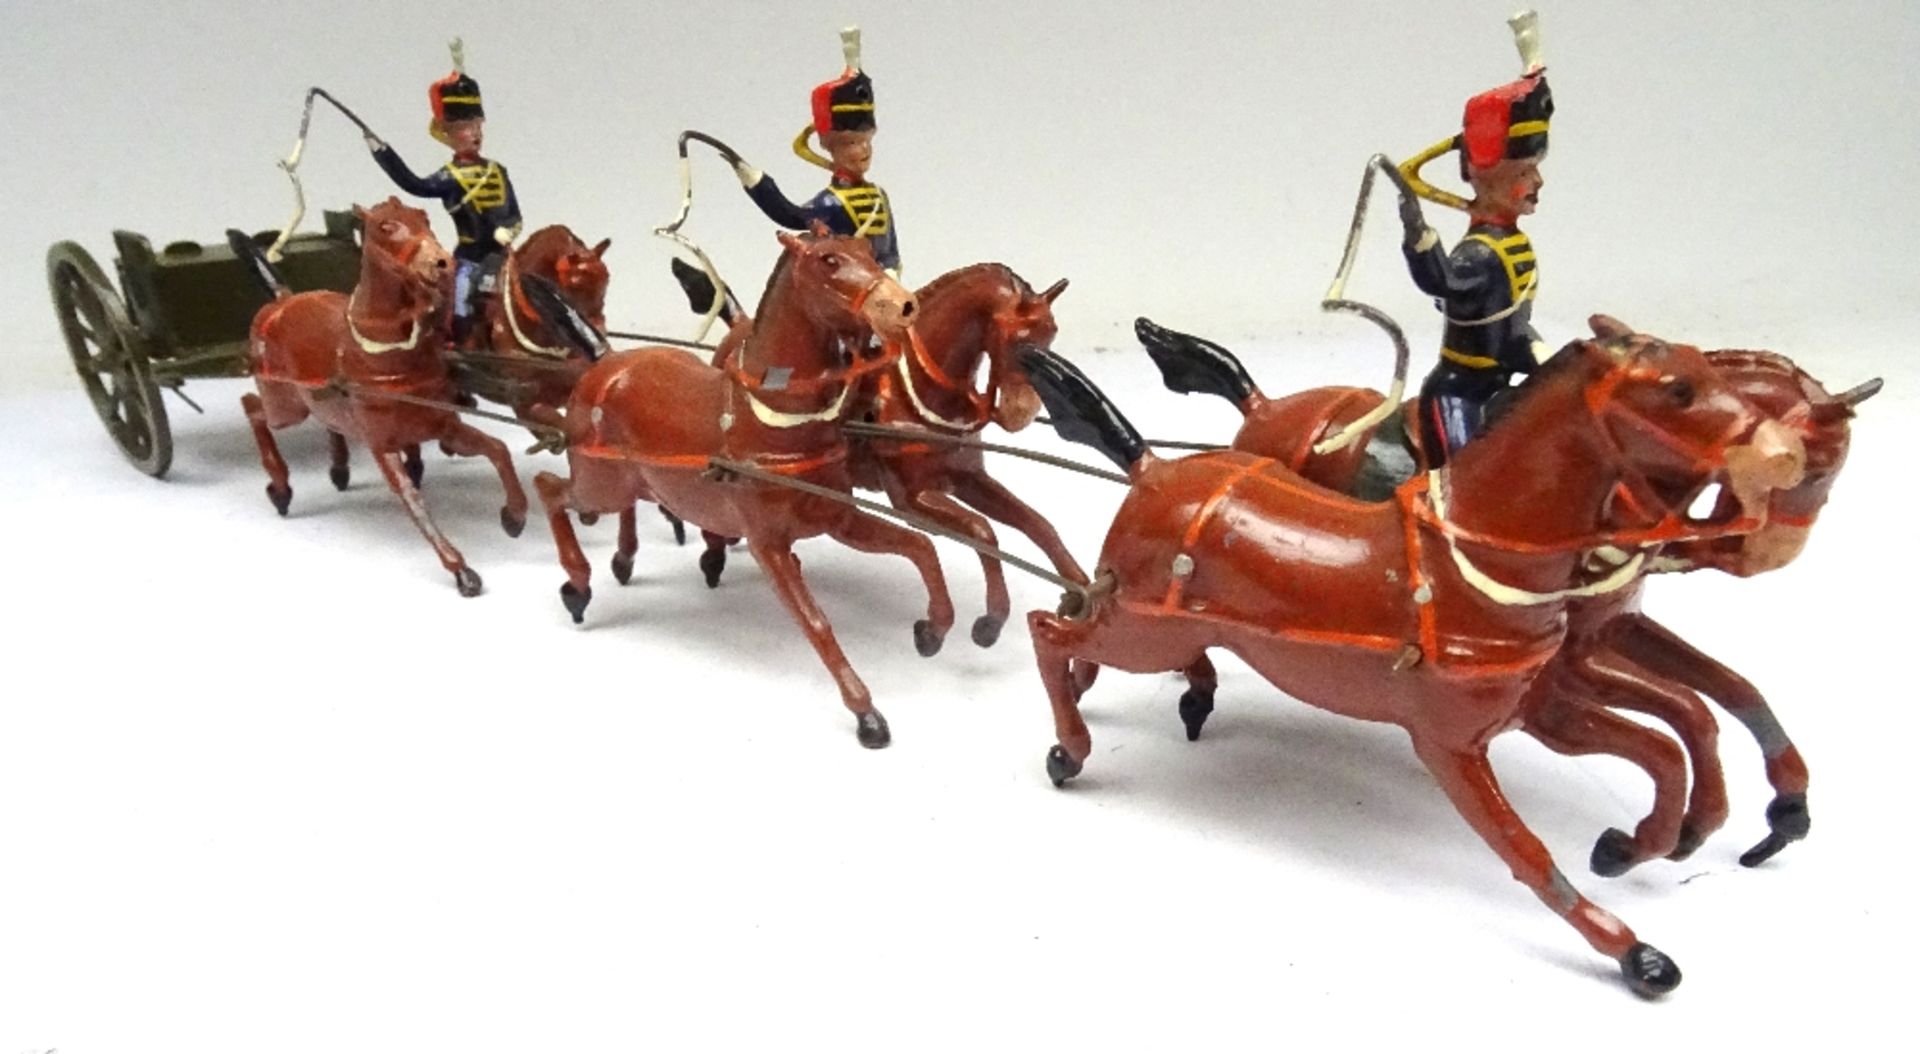 Britains from set 39, Royal Horse Artillery - Image 3 of 5